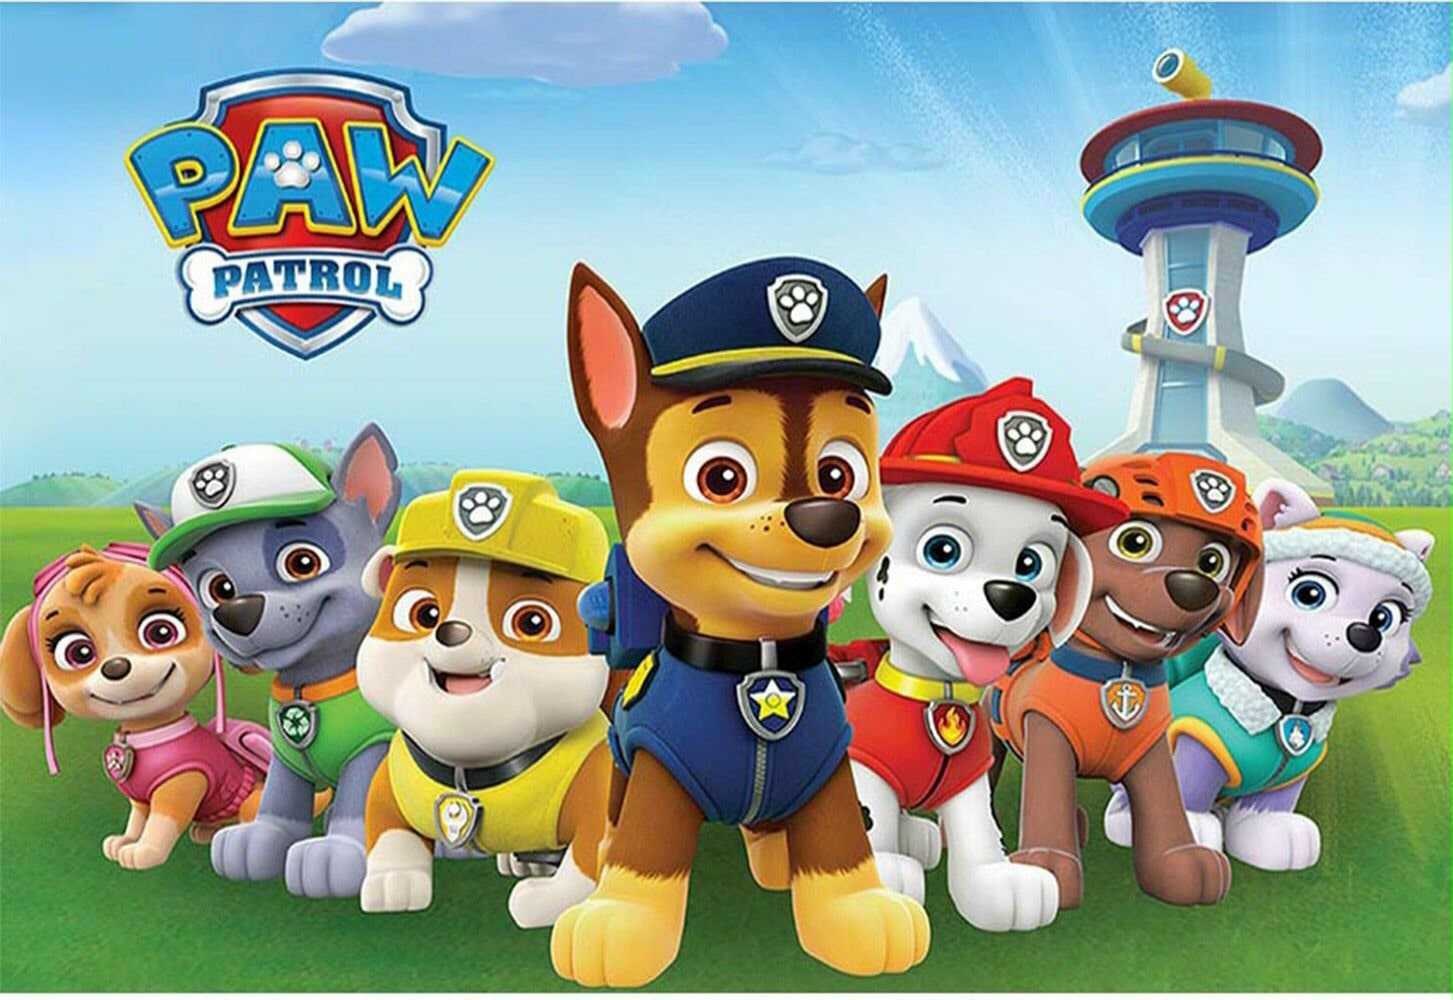 Download Paw Patrol Wallpaper Source  Free Invitations Templates Paw Patrol  PNG Image with No Background  PNGkeycom